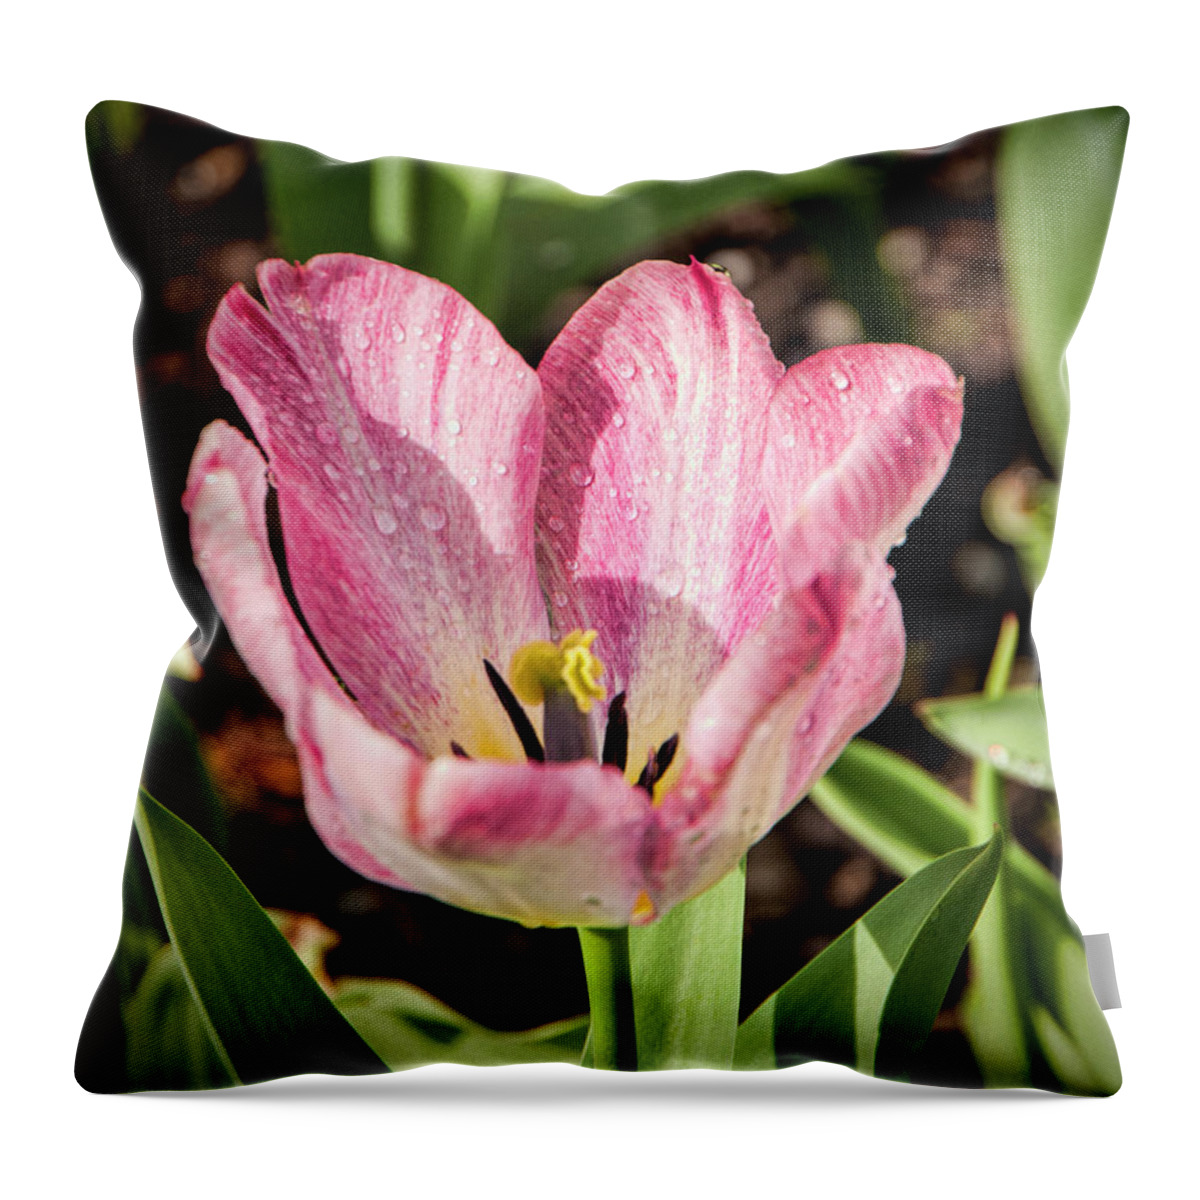 Variegated Tulip Throw Pillow featuring the photograph Variegated Tulip by Phyllis Taylor